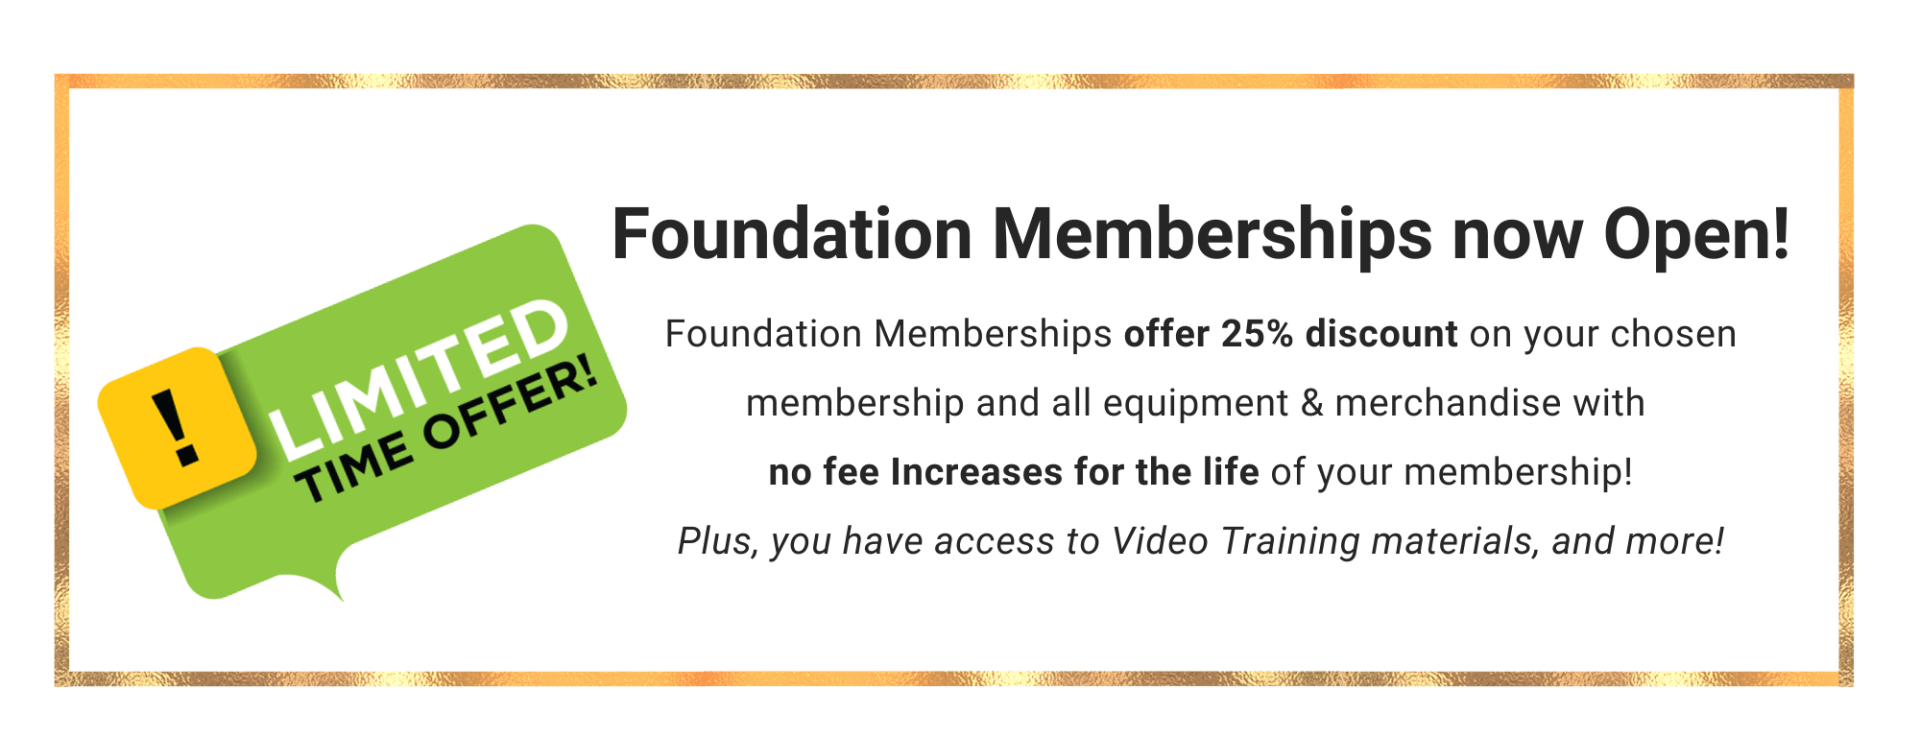 Foundation Memberships now Open! Amazing discounts for all!